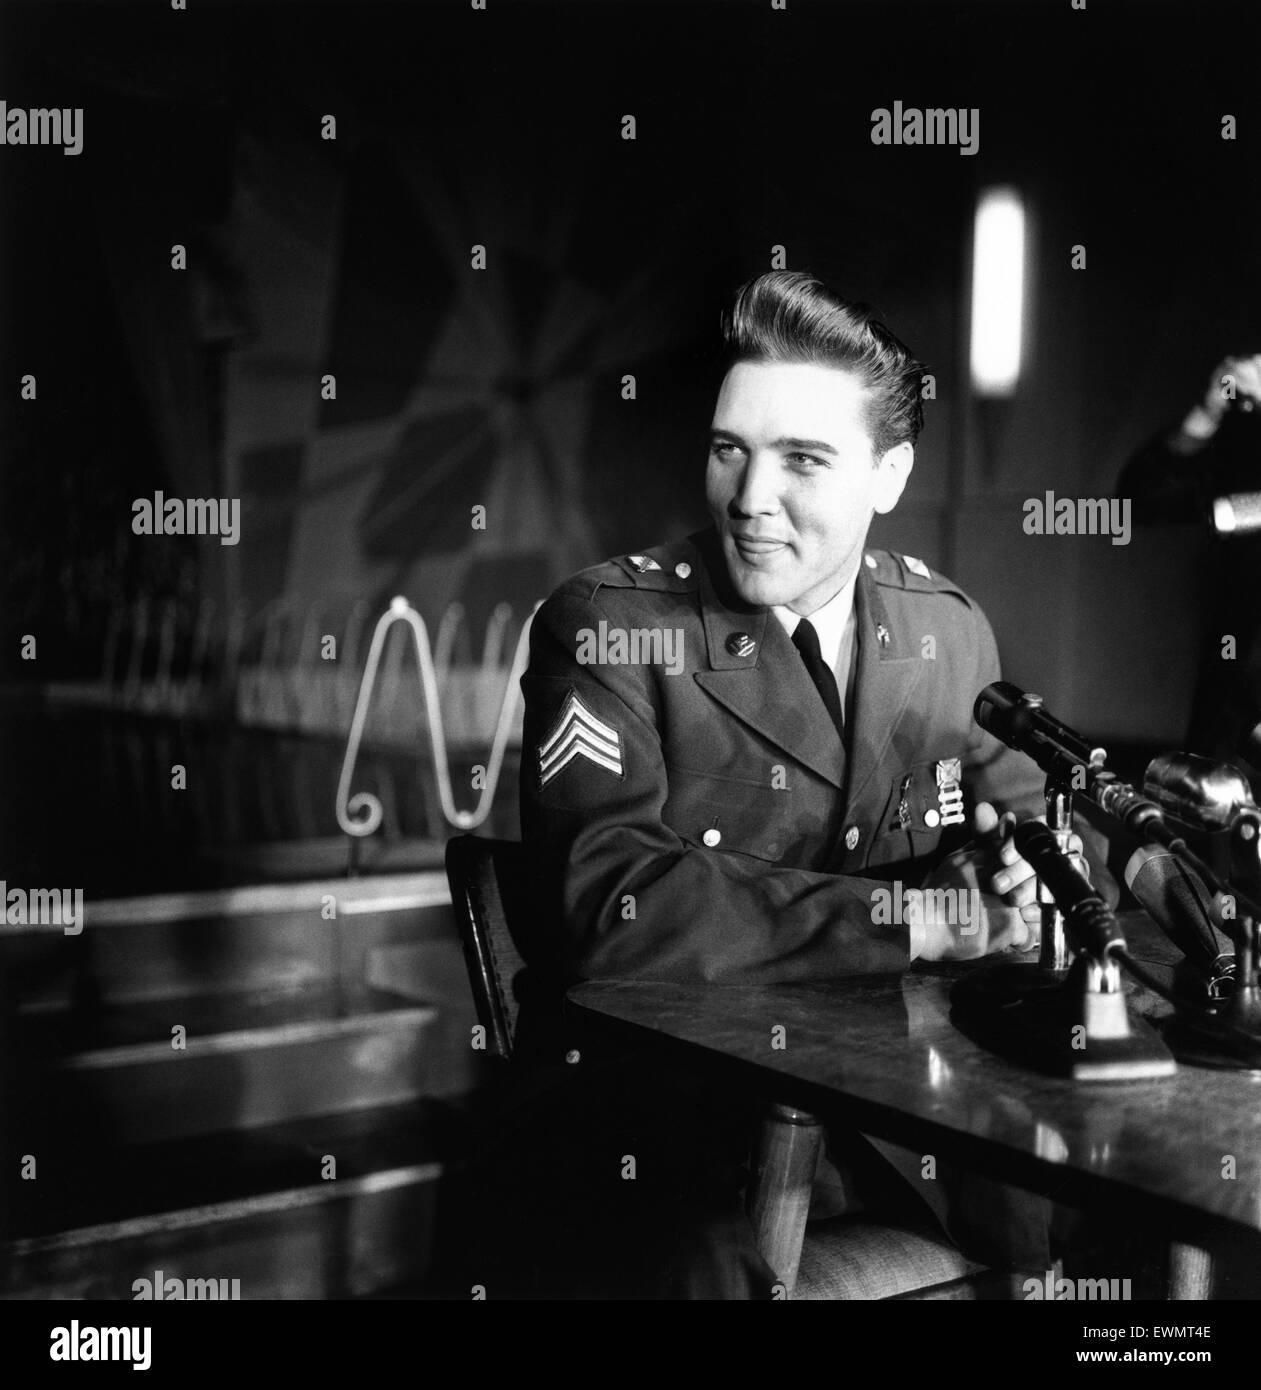 American rock and roll singer and musician Elvis Presley pictured wearing army uniform as he attends a press conference in Germany. March 1960. Stock Photo